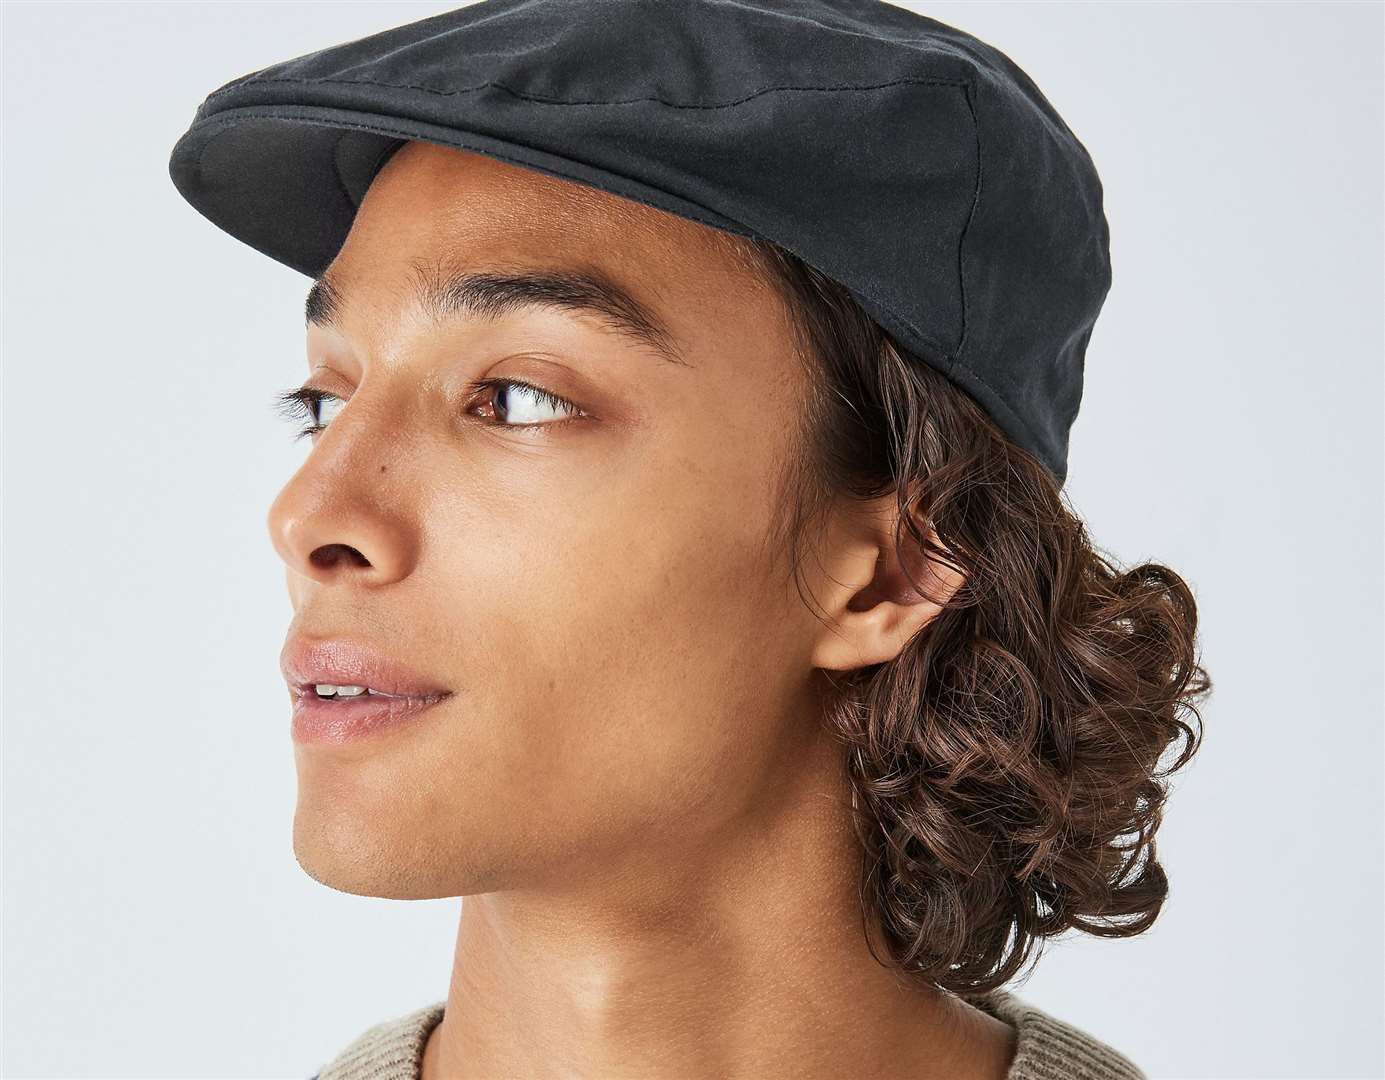 Flat caps have been among the fashion trends of the last decade. Image: John Lewis.